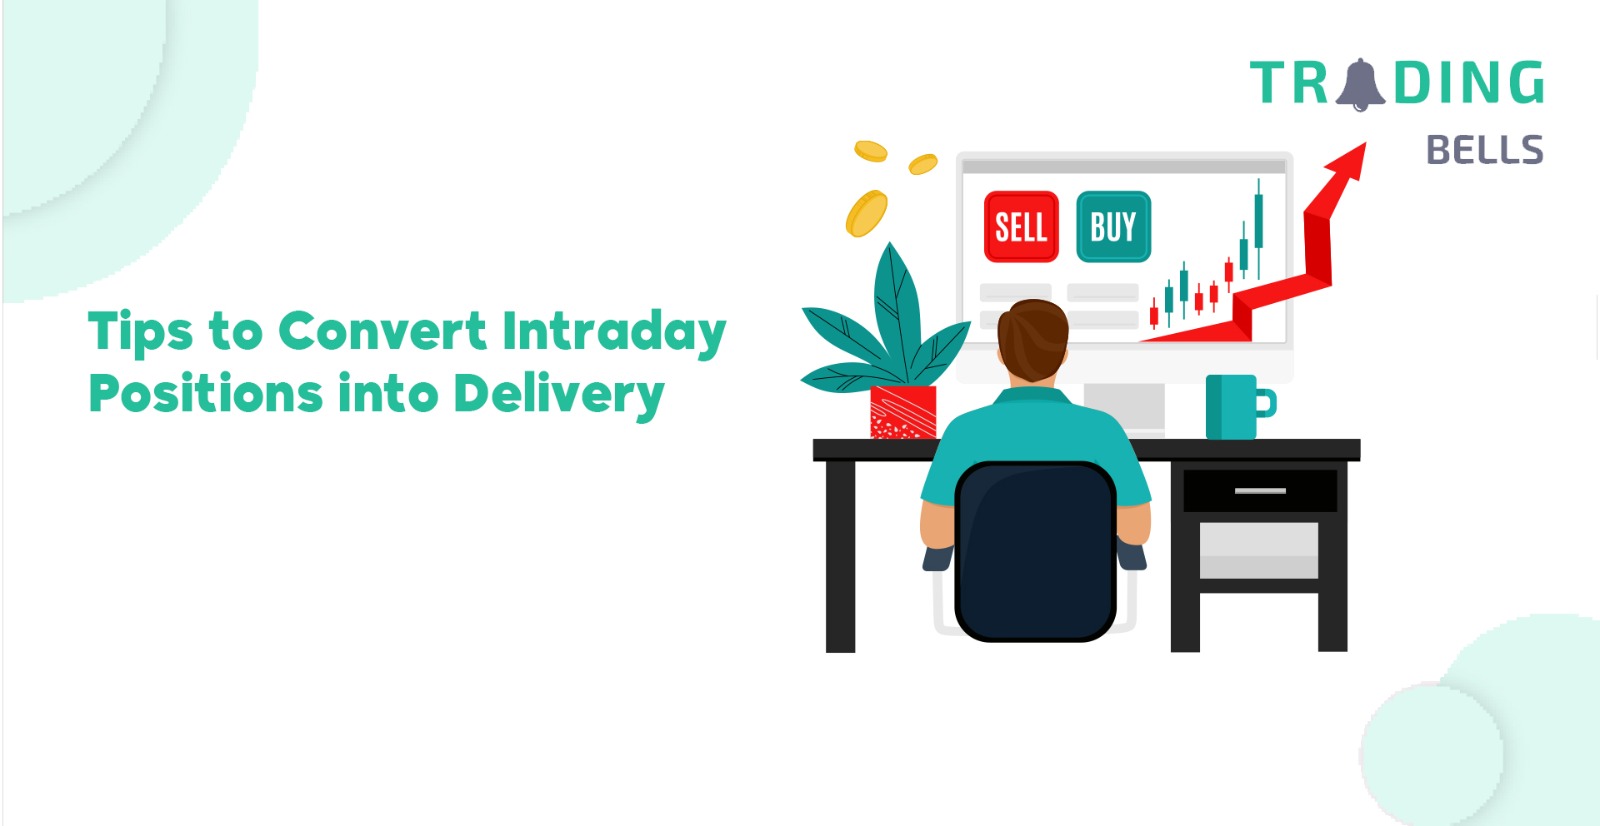 Tips to Convert Intraday Positions into Delivery